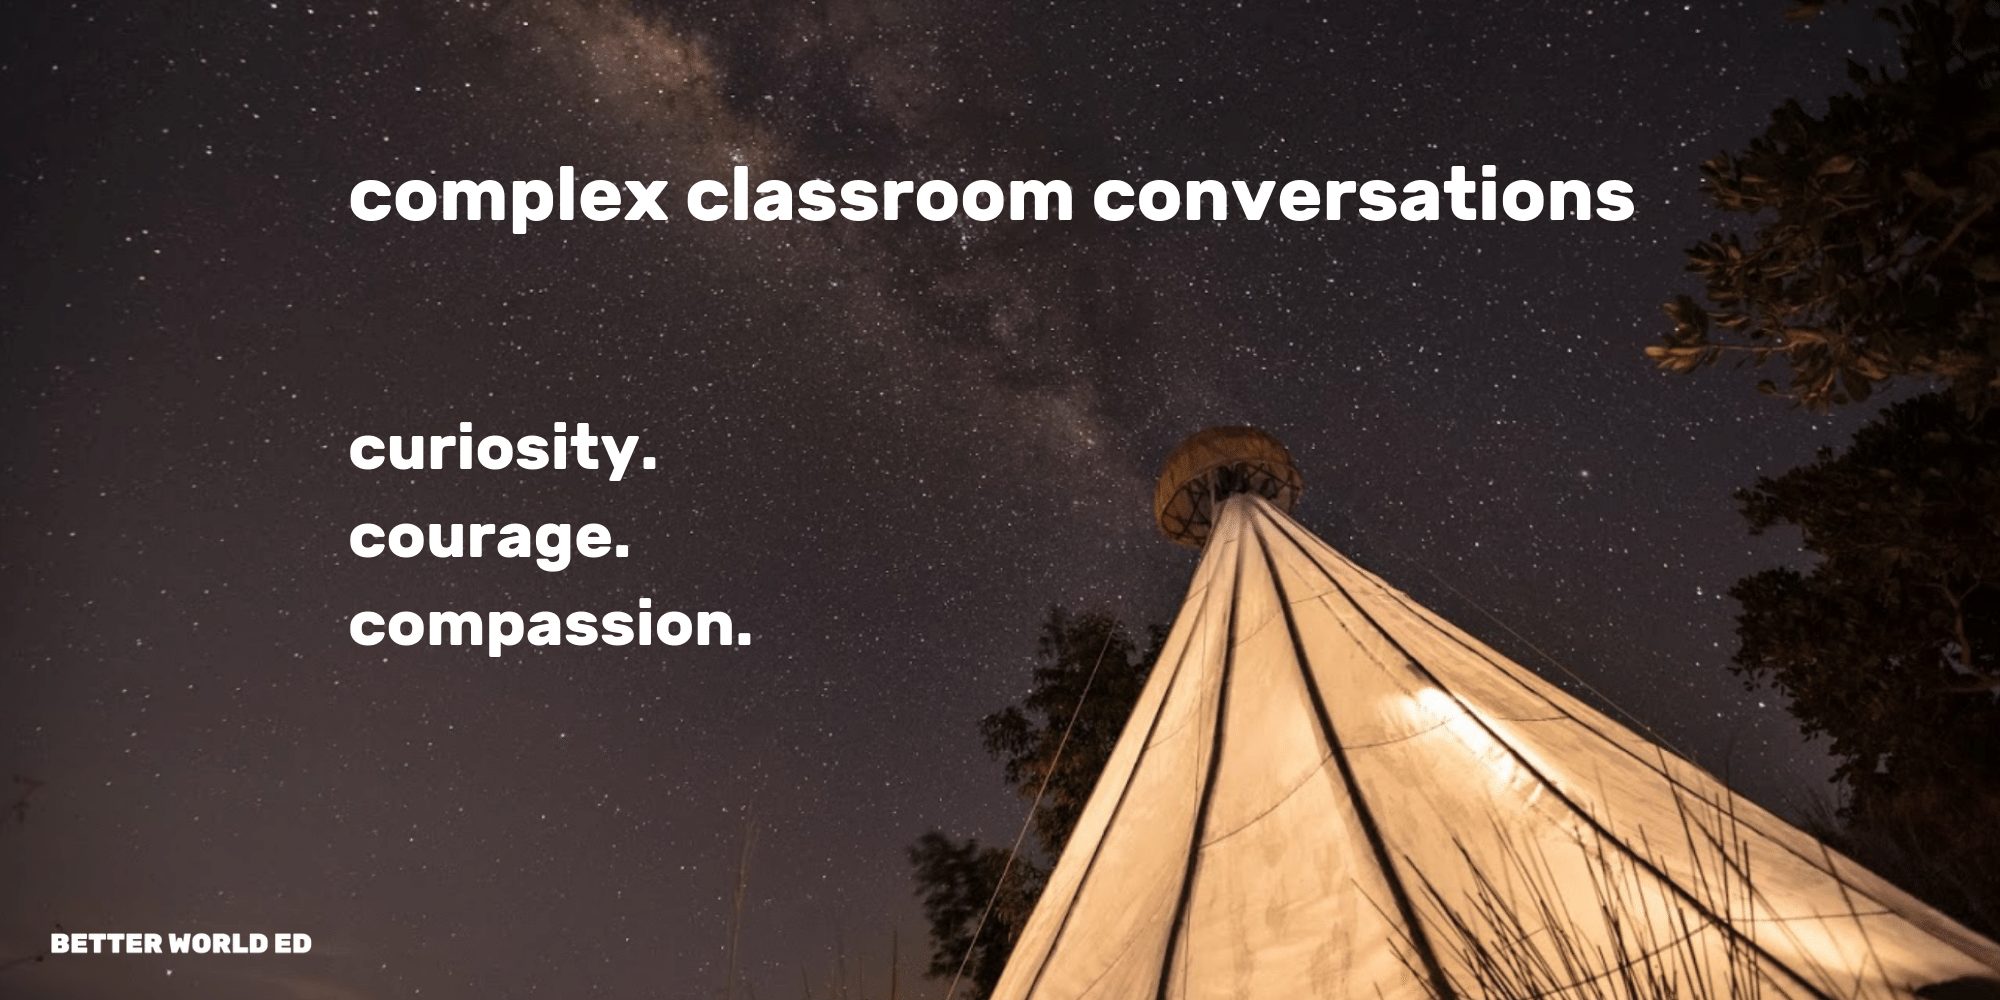 Having complex classroom conversations with courage and compassion